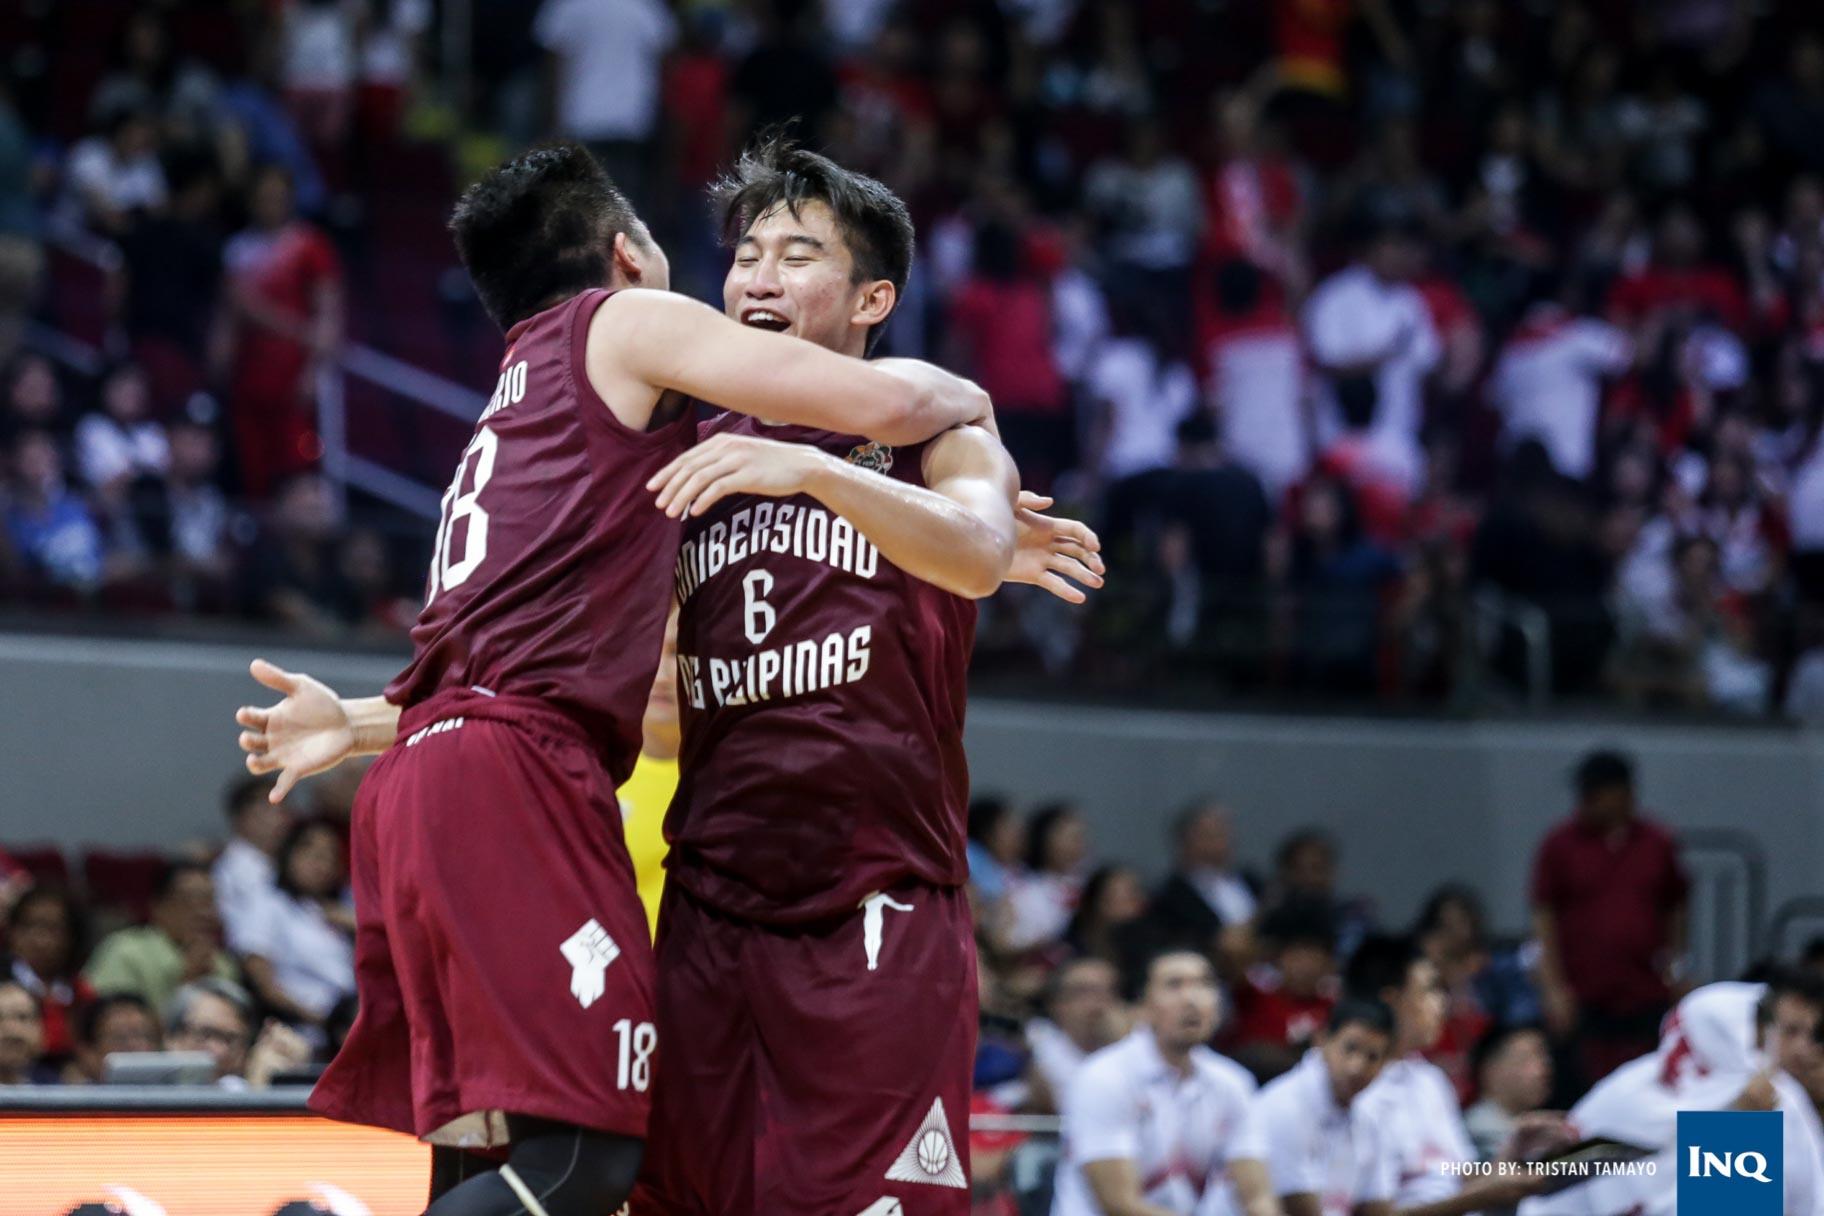 Paul Desiderio and Jett Manuel. Photo by Tristan Tamayo/INQUIRER.net